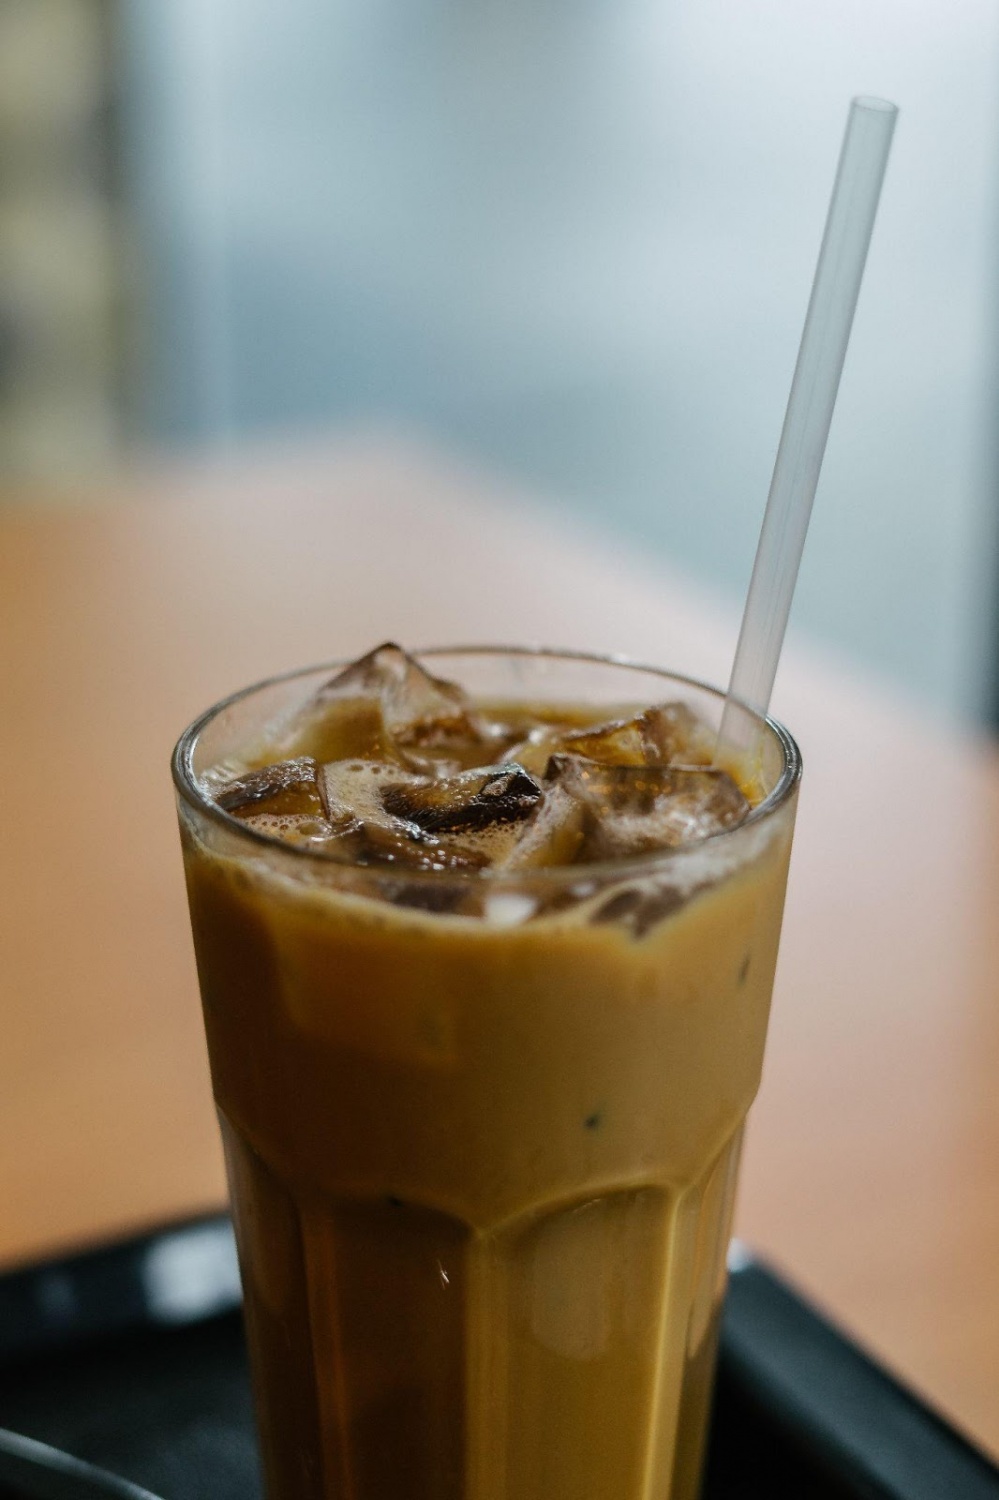 Making the Perfect Iced Coffee - Brewing Methods to Try This Summer